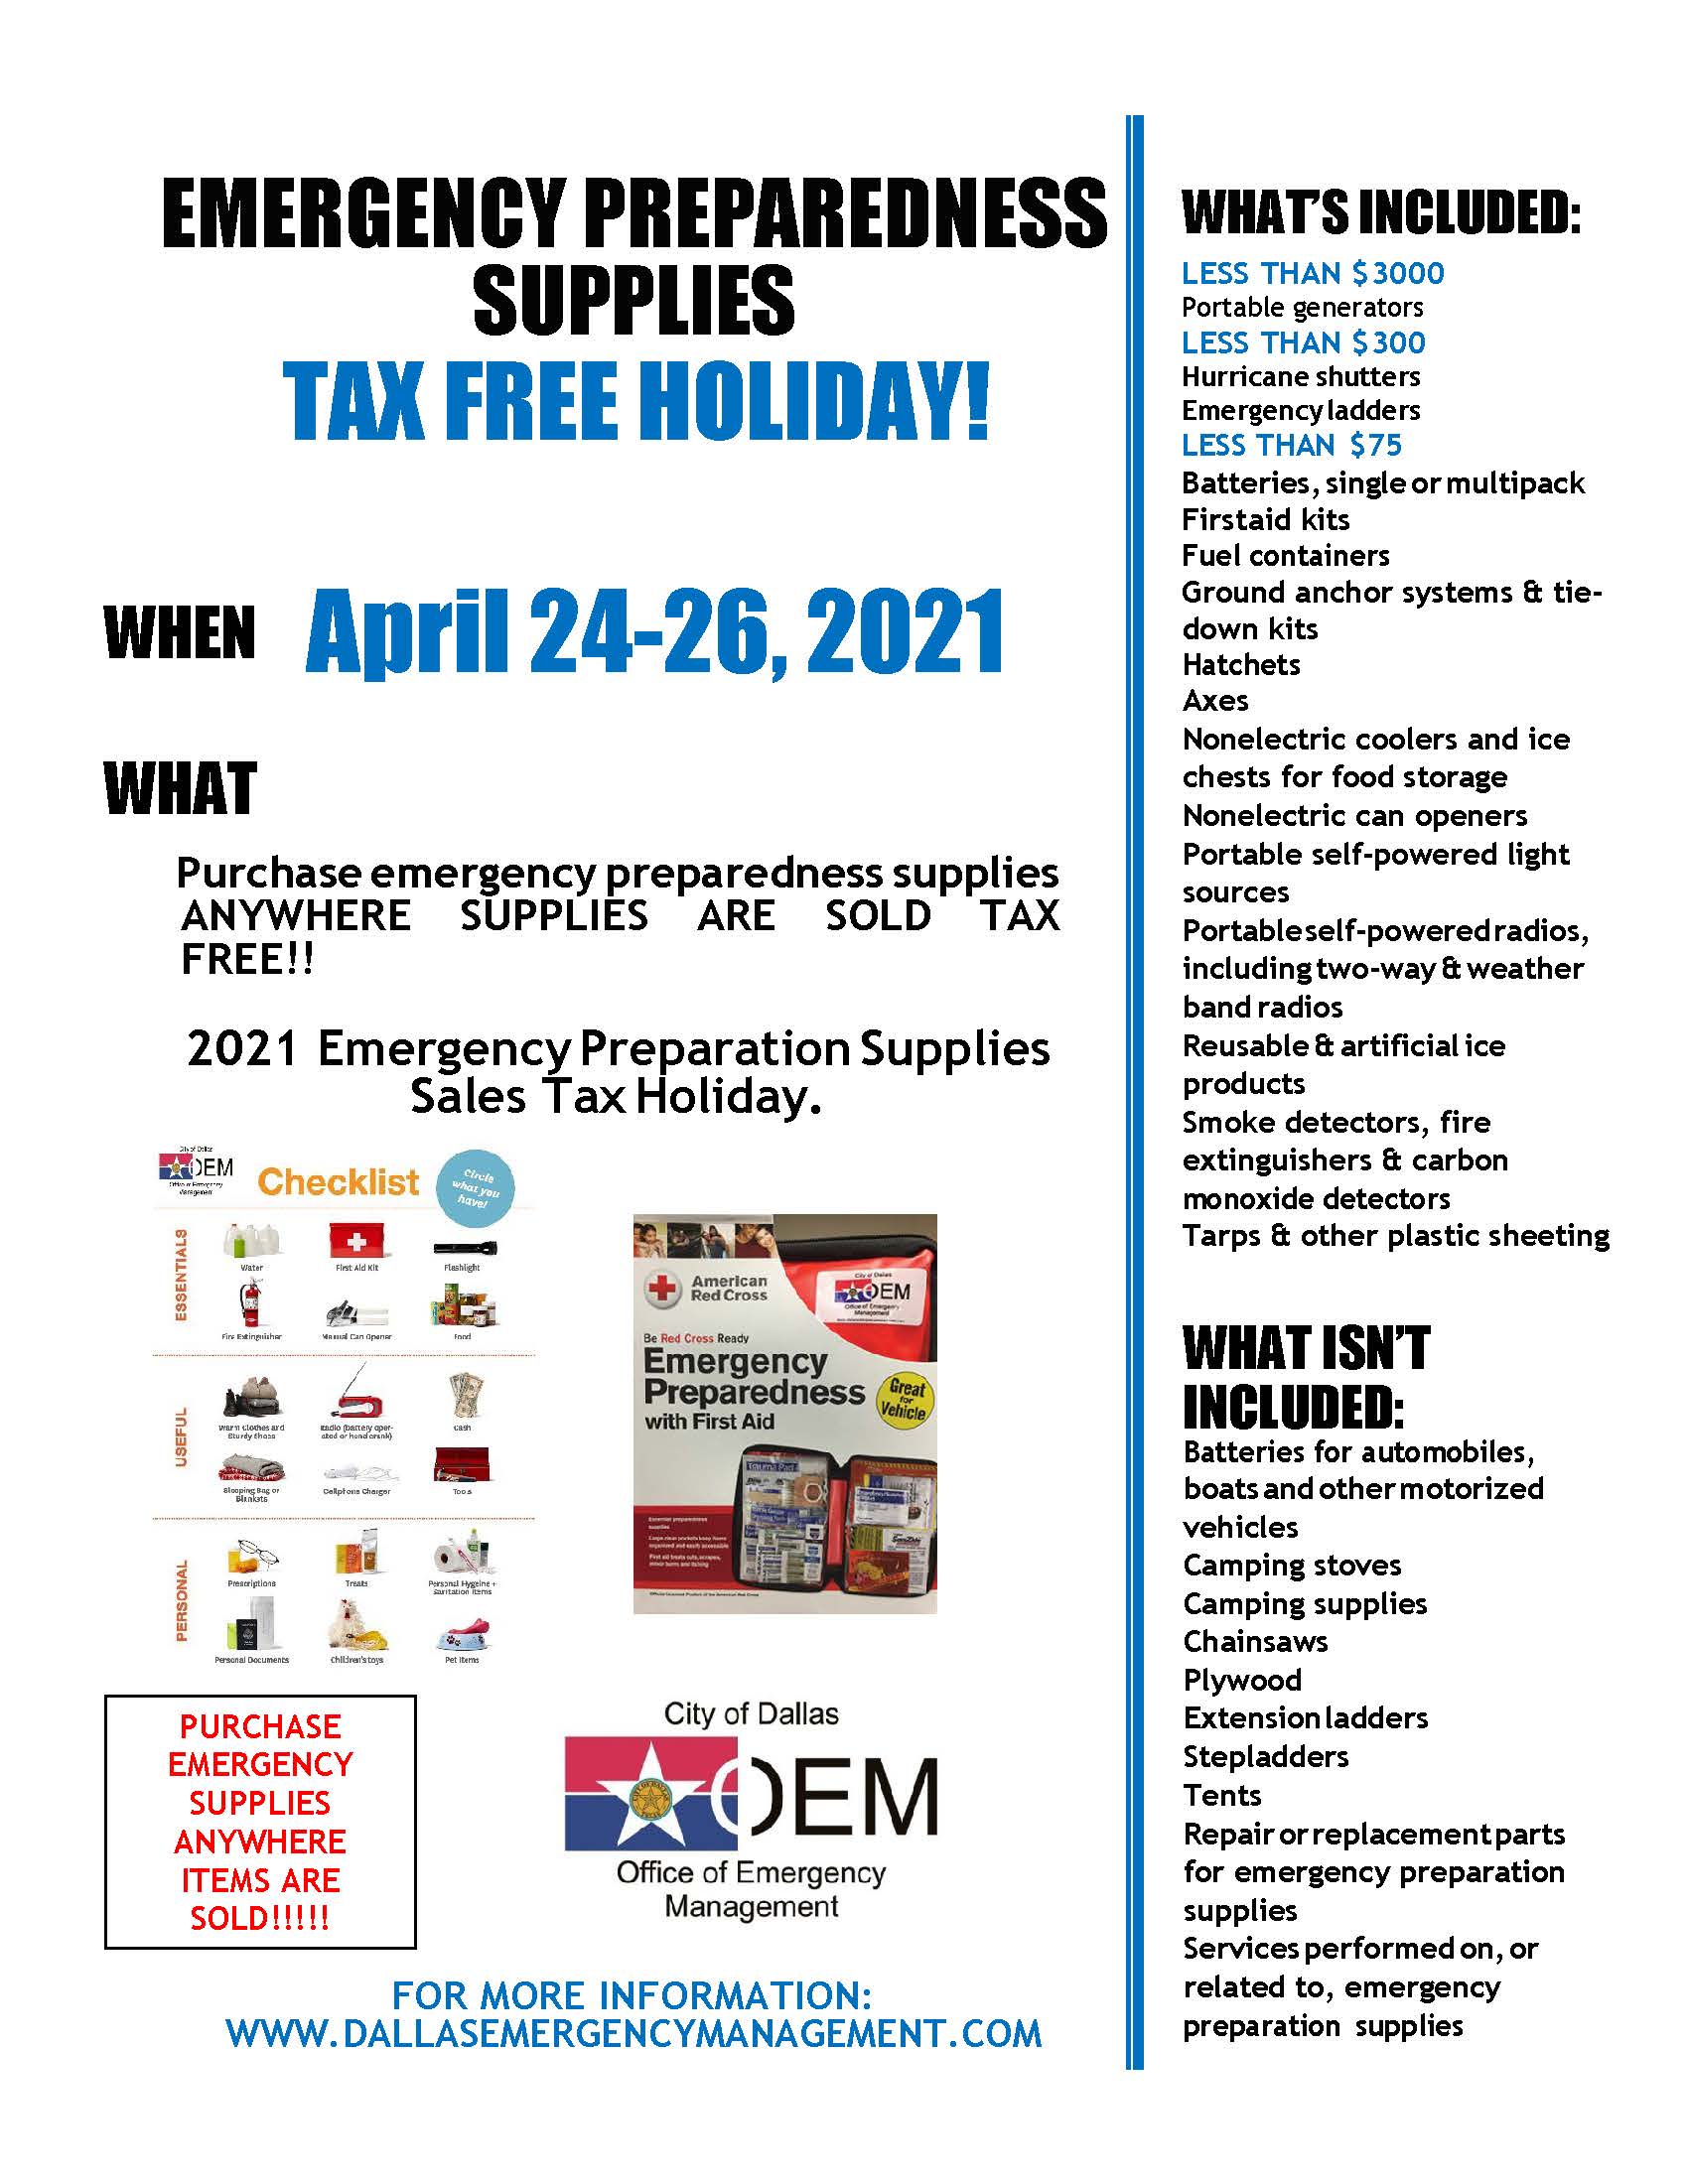 Office of Emergency Management Emergency Supply Tax Free Weekend